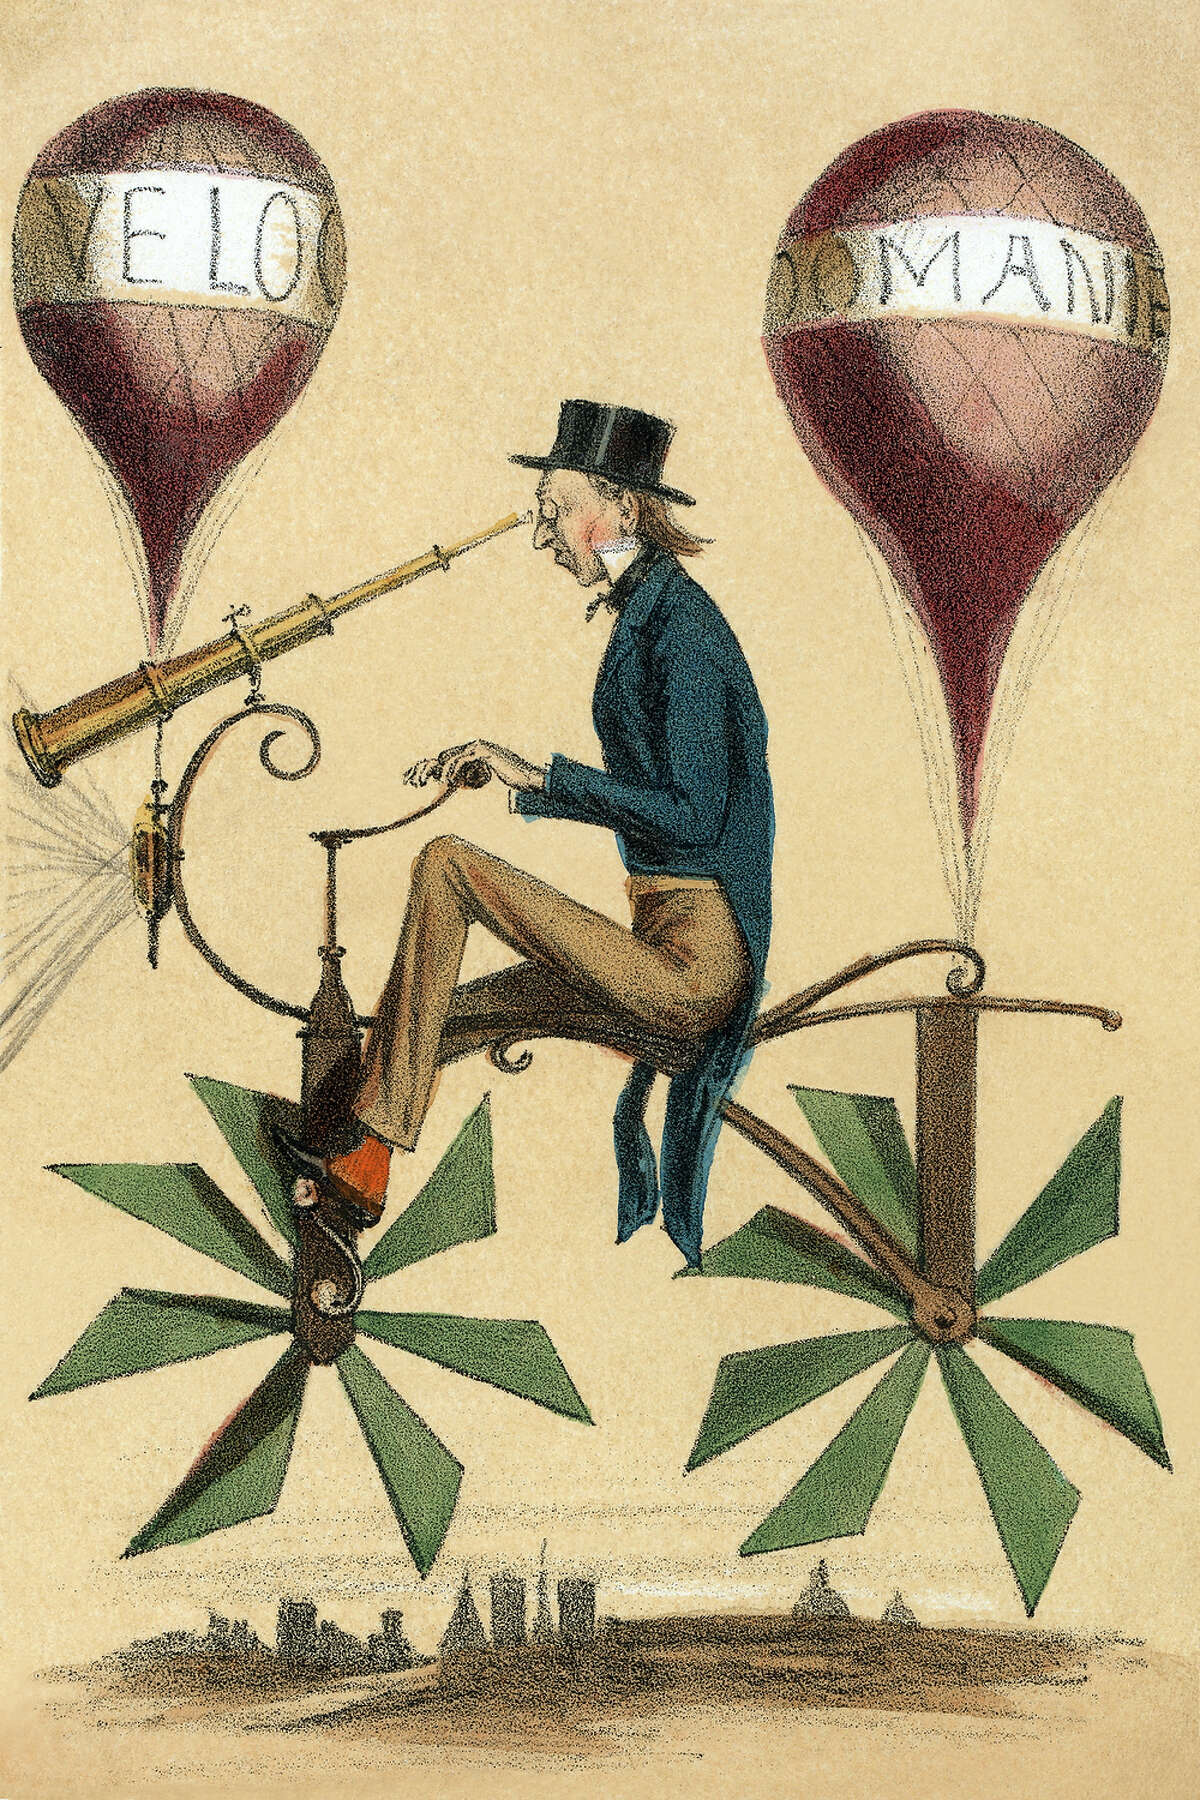 1867: A French cartoon shows a man riding on a bicycle-like flying machine while looking through a telescope attached to the front.